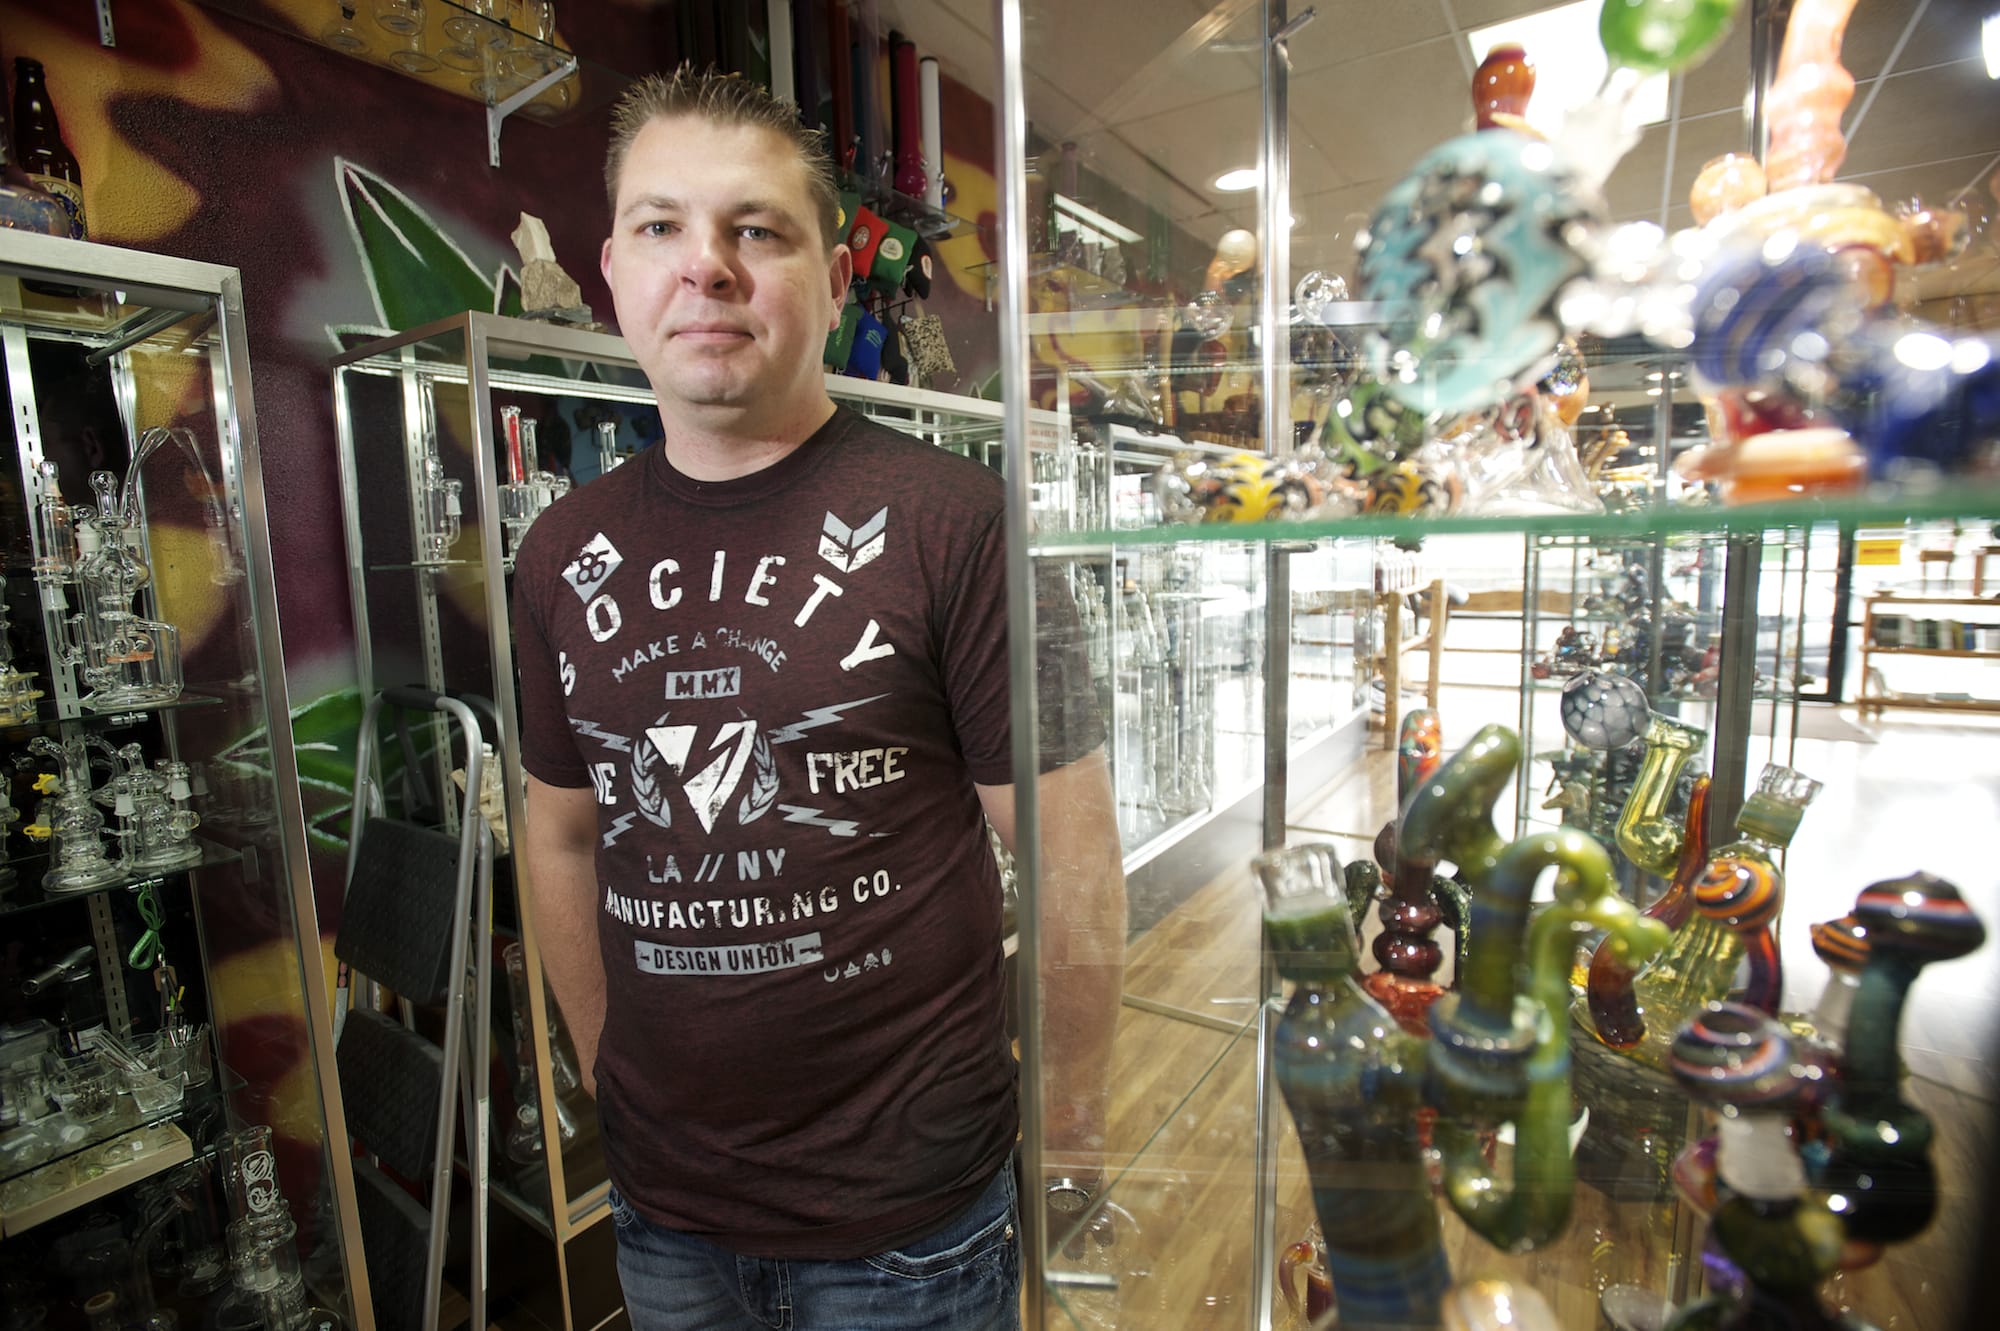 Brandon Brock said his business could take a hit due to Washougal's marijuana moratorium and the availability of product.